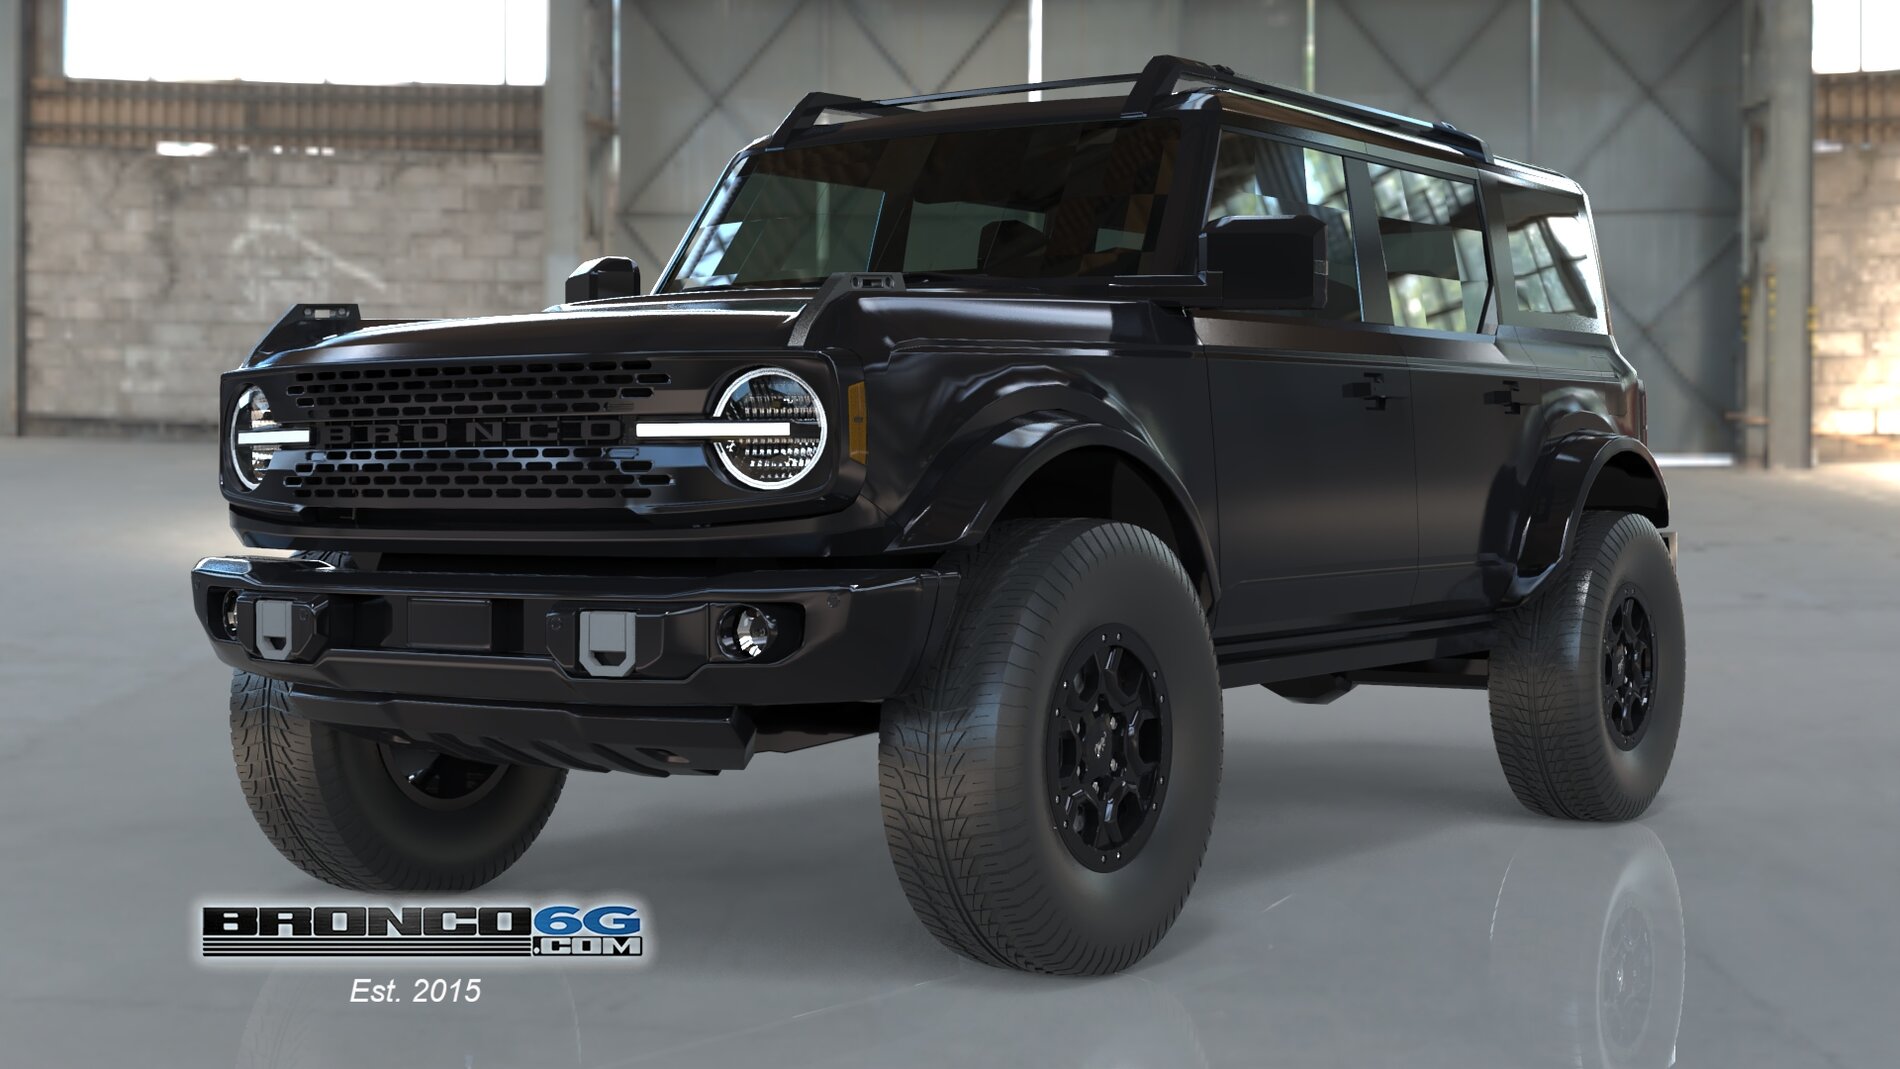 Ford Bronco Blacked Out 2021 Bronco With Satin / Matte Wrap Rendered Look 1600367169106